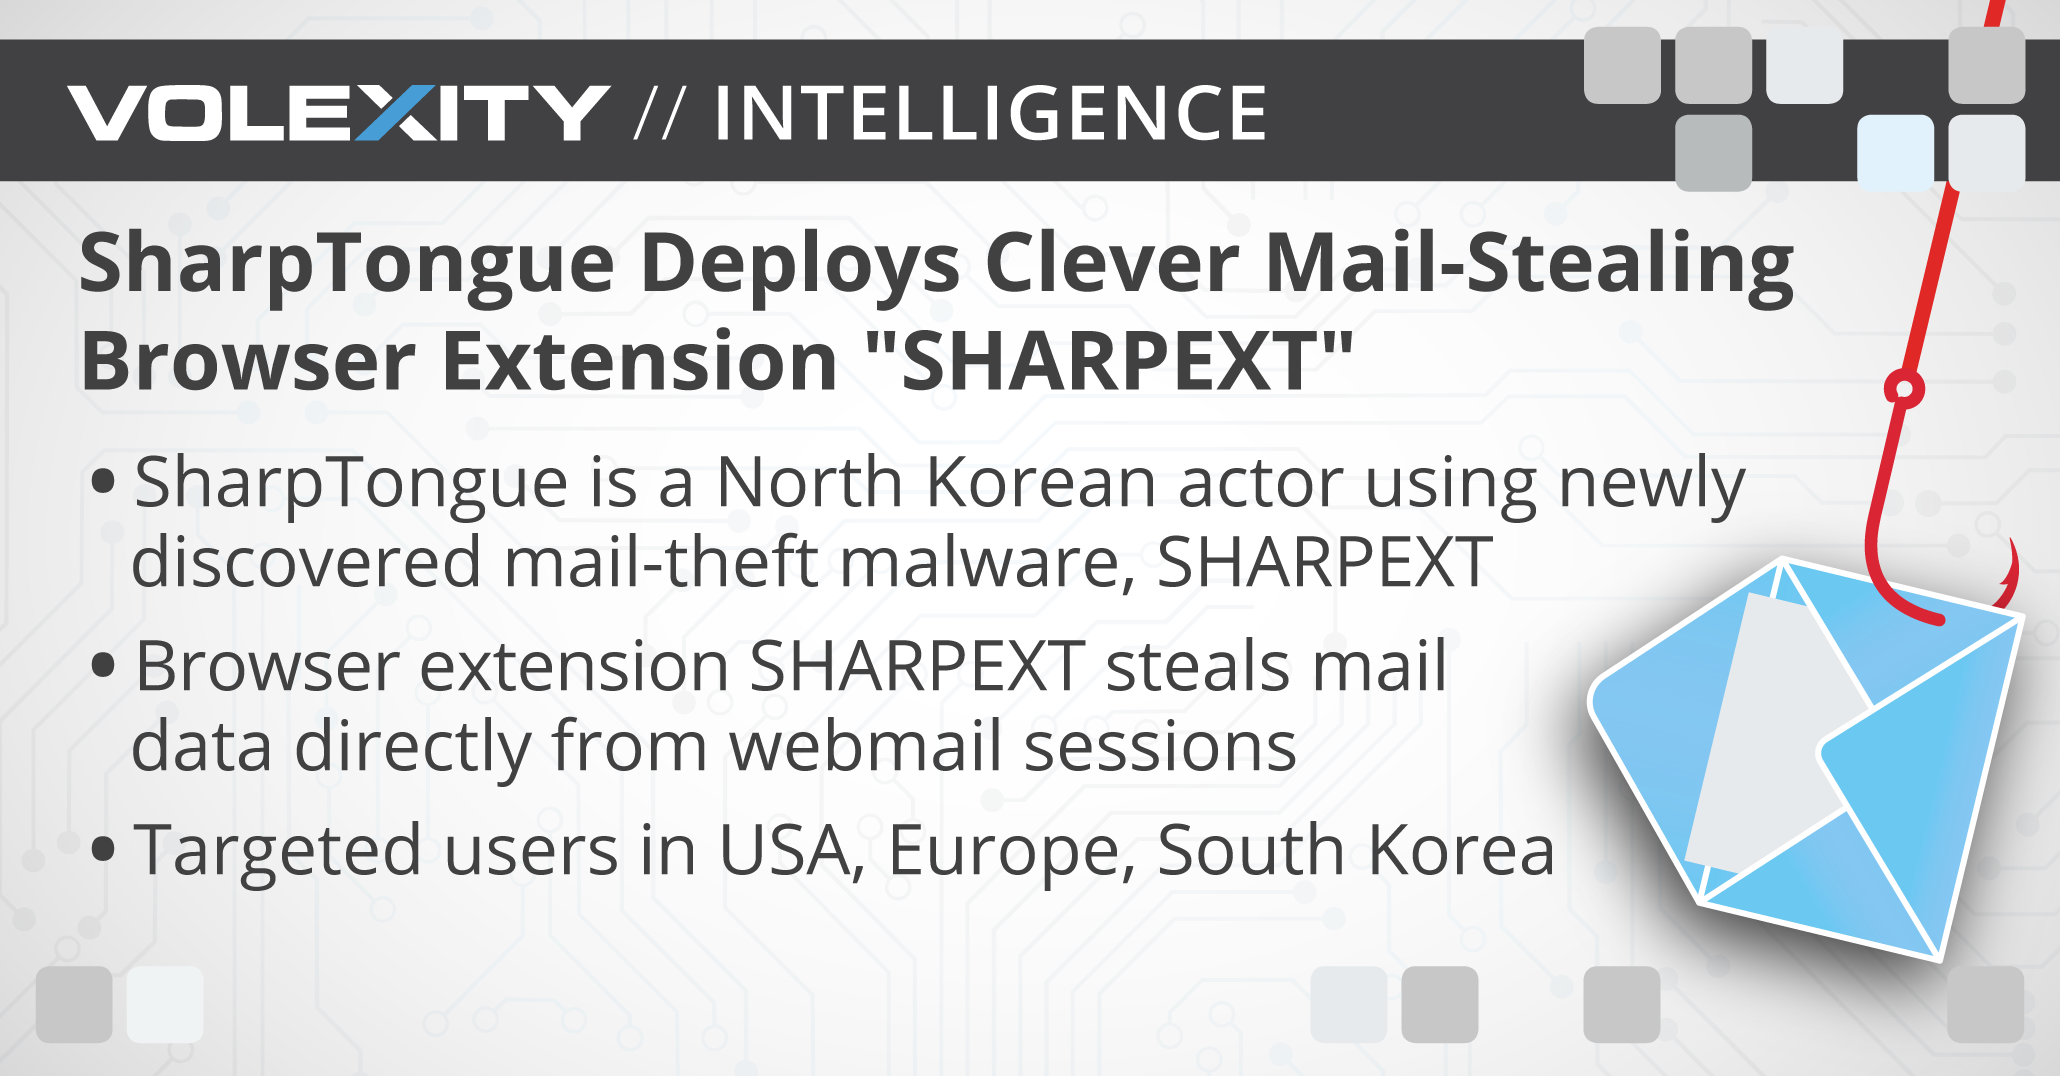 SharpTongue Deploys Clever Mail-Stealing Browser Extension “SHARPEXT”